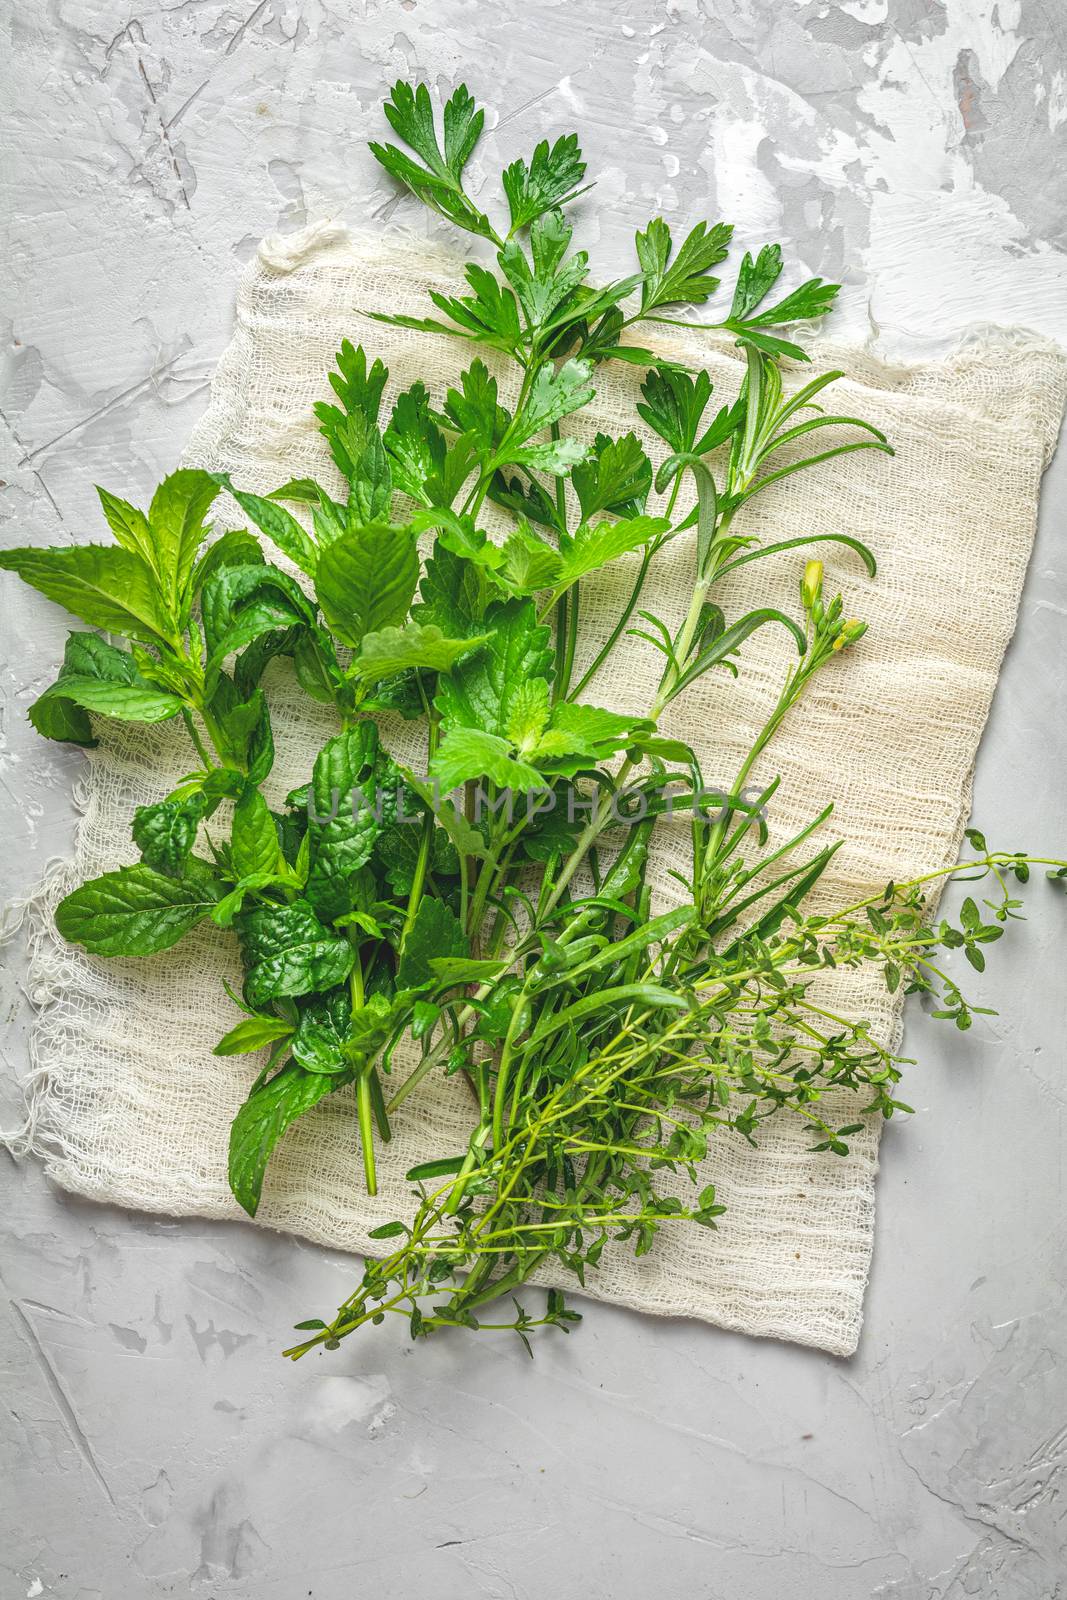 Herbs and spices. Fresh herbs selection included rosemary, thyme, mint, lemon balm, parsley and arugula. Overhead view, copy space. 